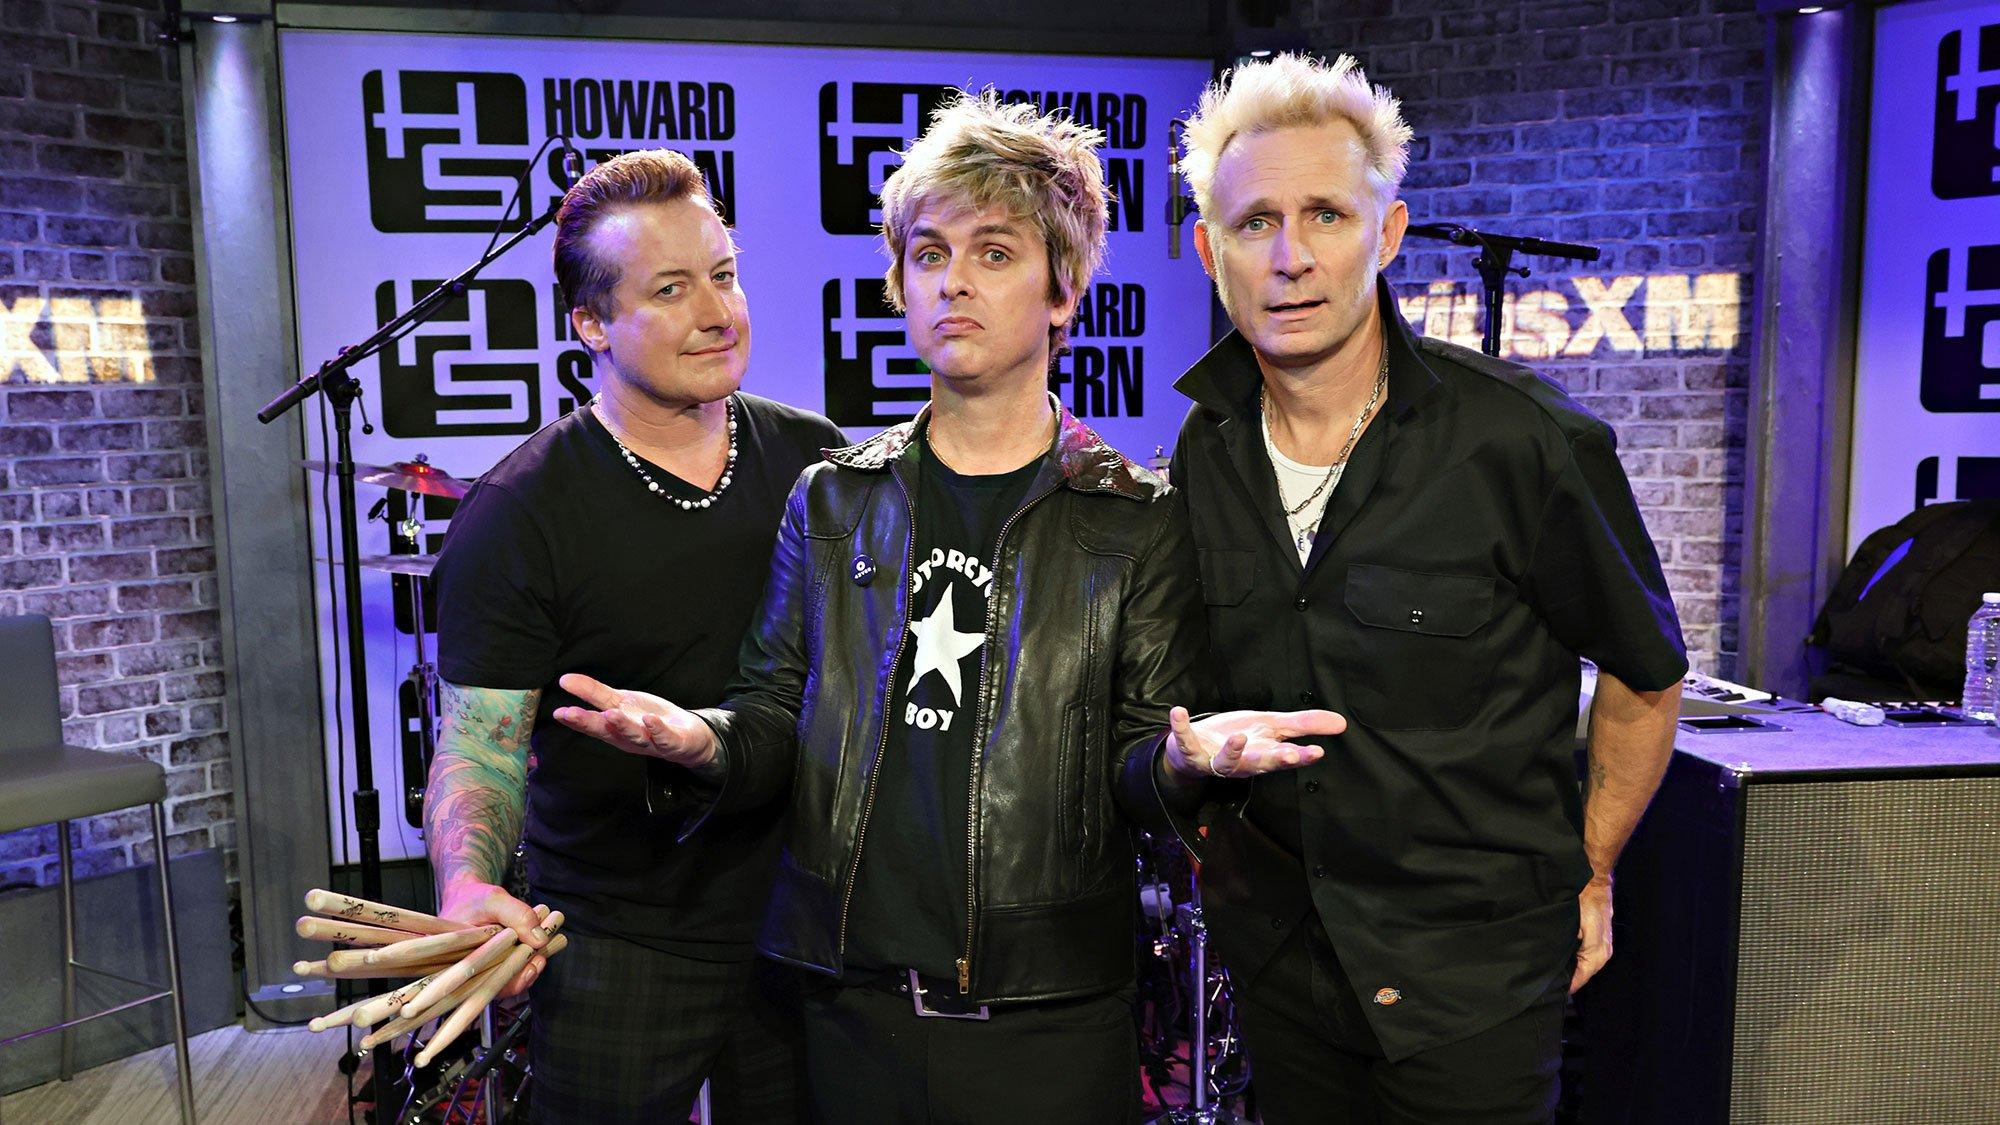 Green Day's 'Saviors': How Their New Album Links 'Dookie